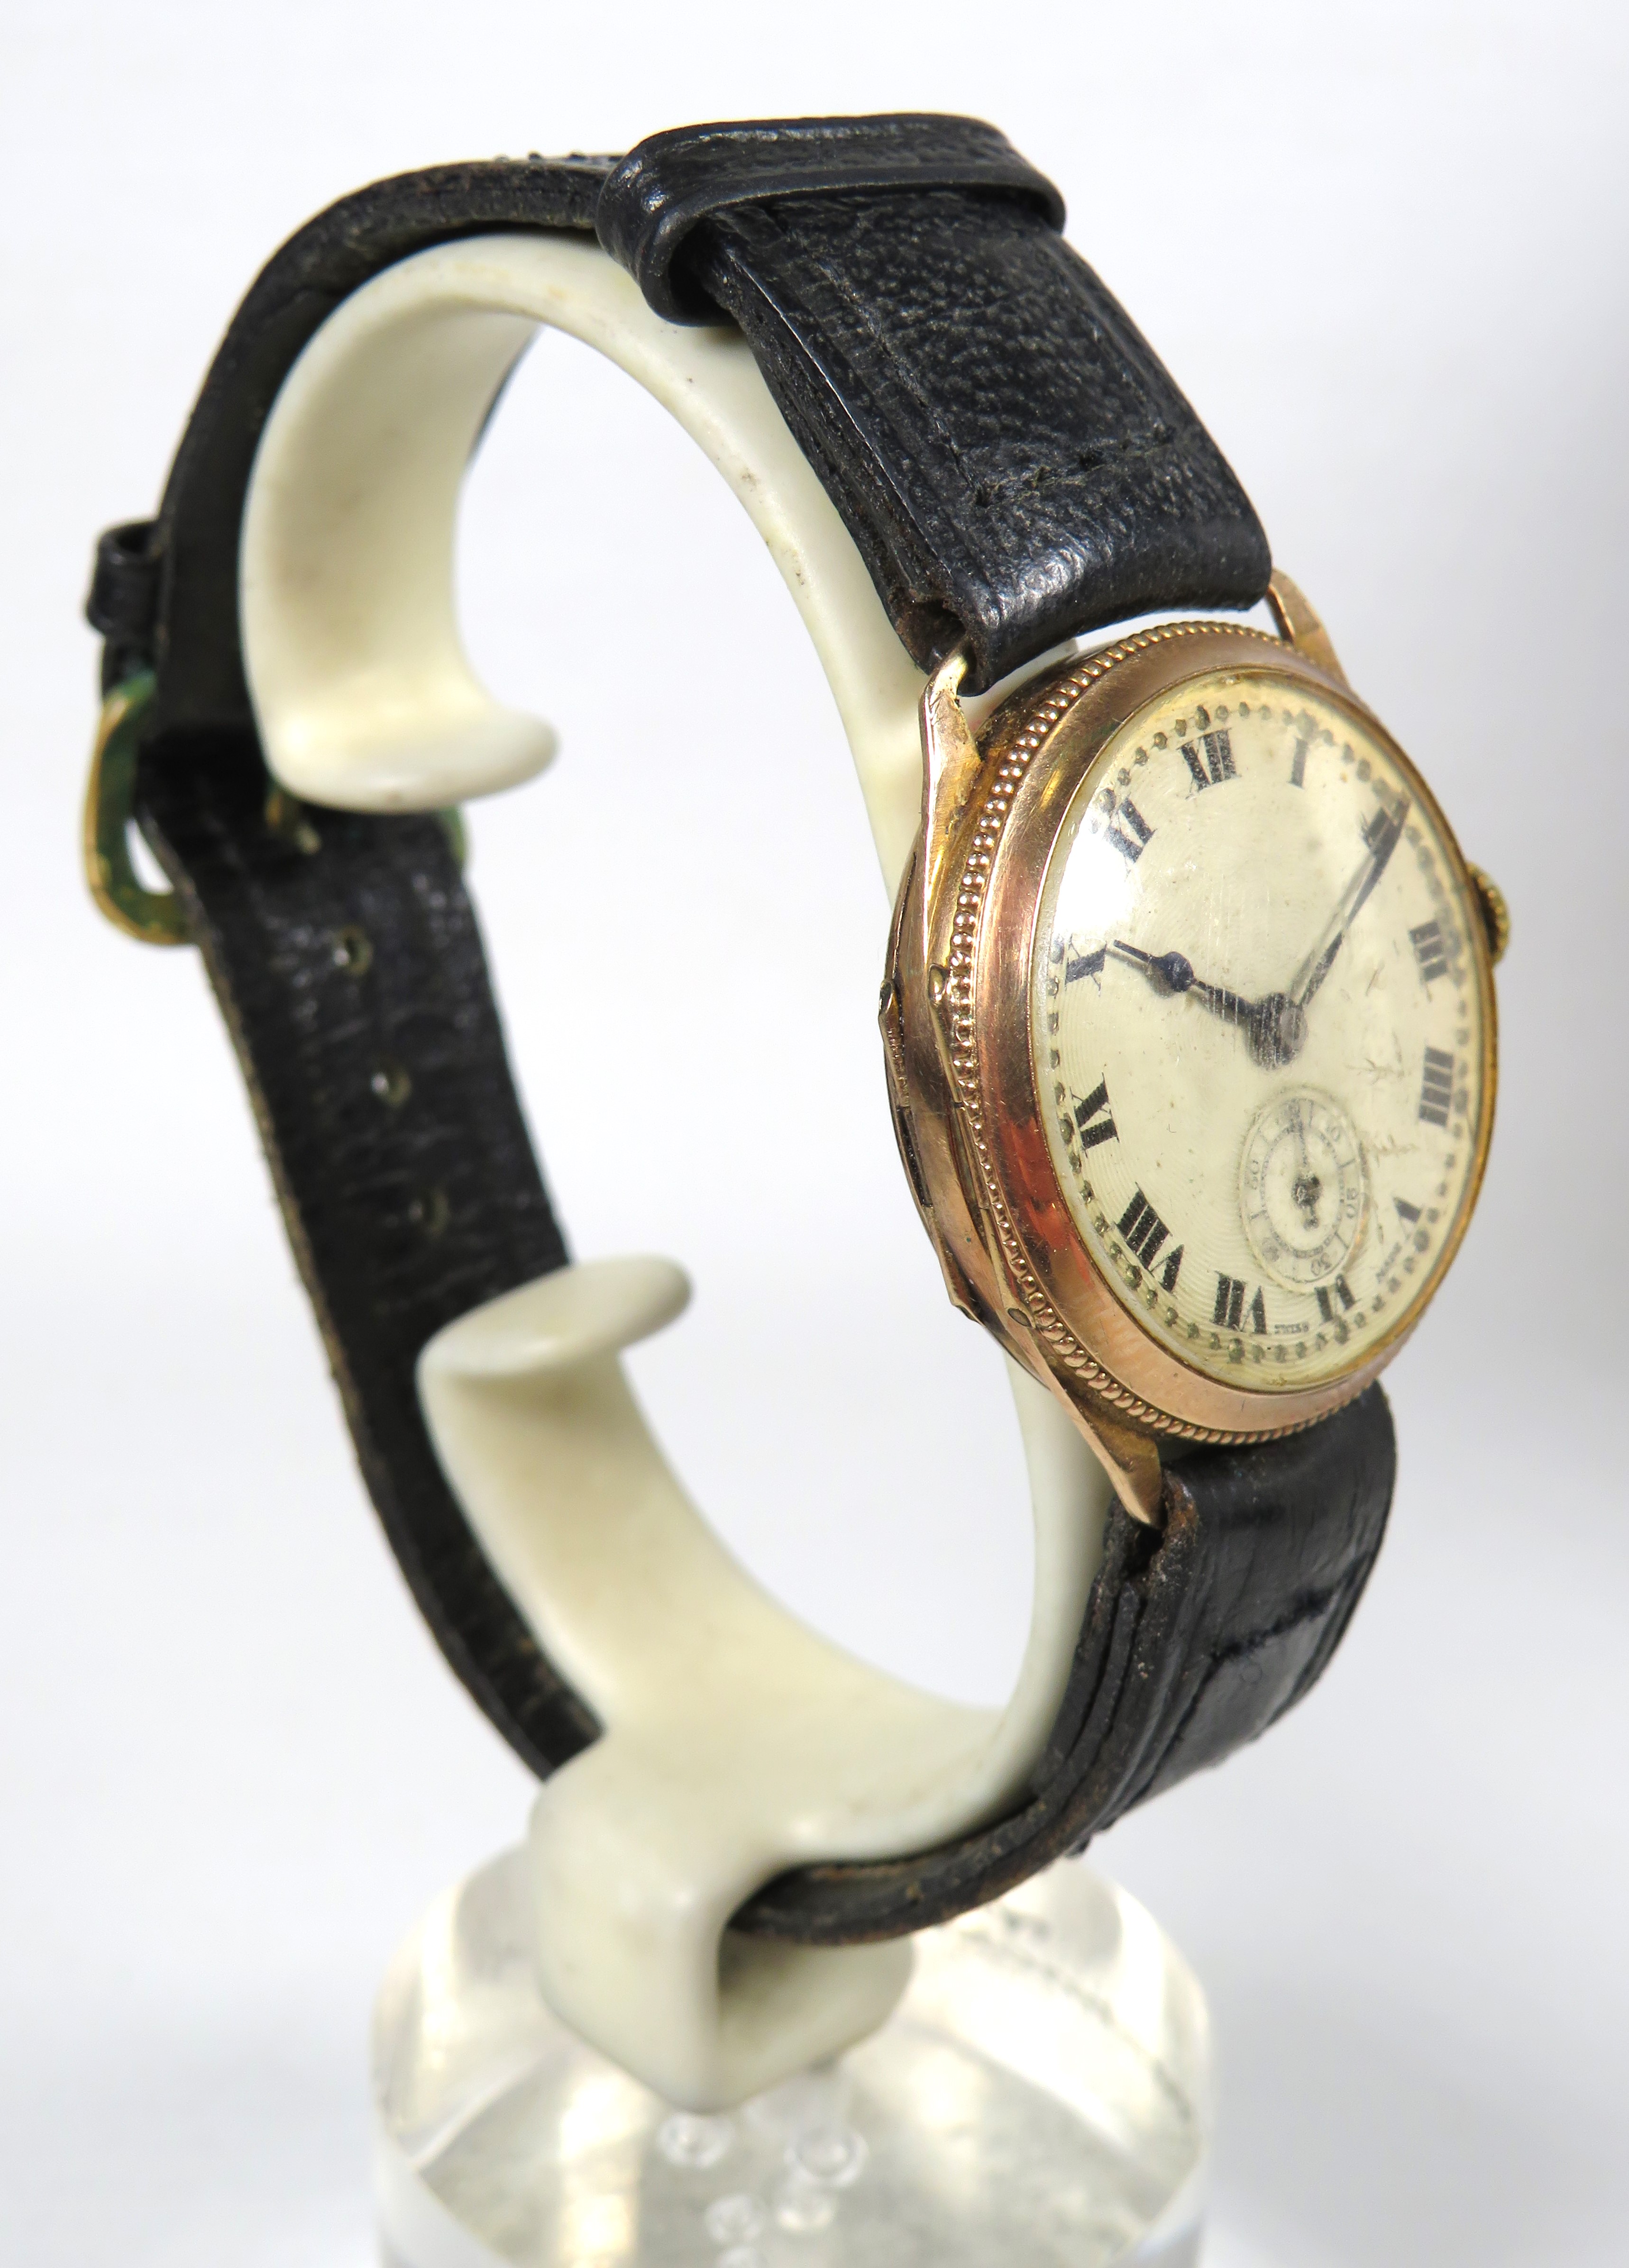 Swiss made 15 Jewel watch with leather strap, Subsidary dial. 9ct Case & Bezel.  Non runner for spar - Image 2 of 5